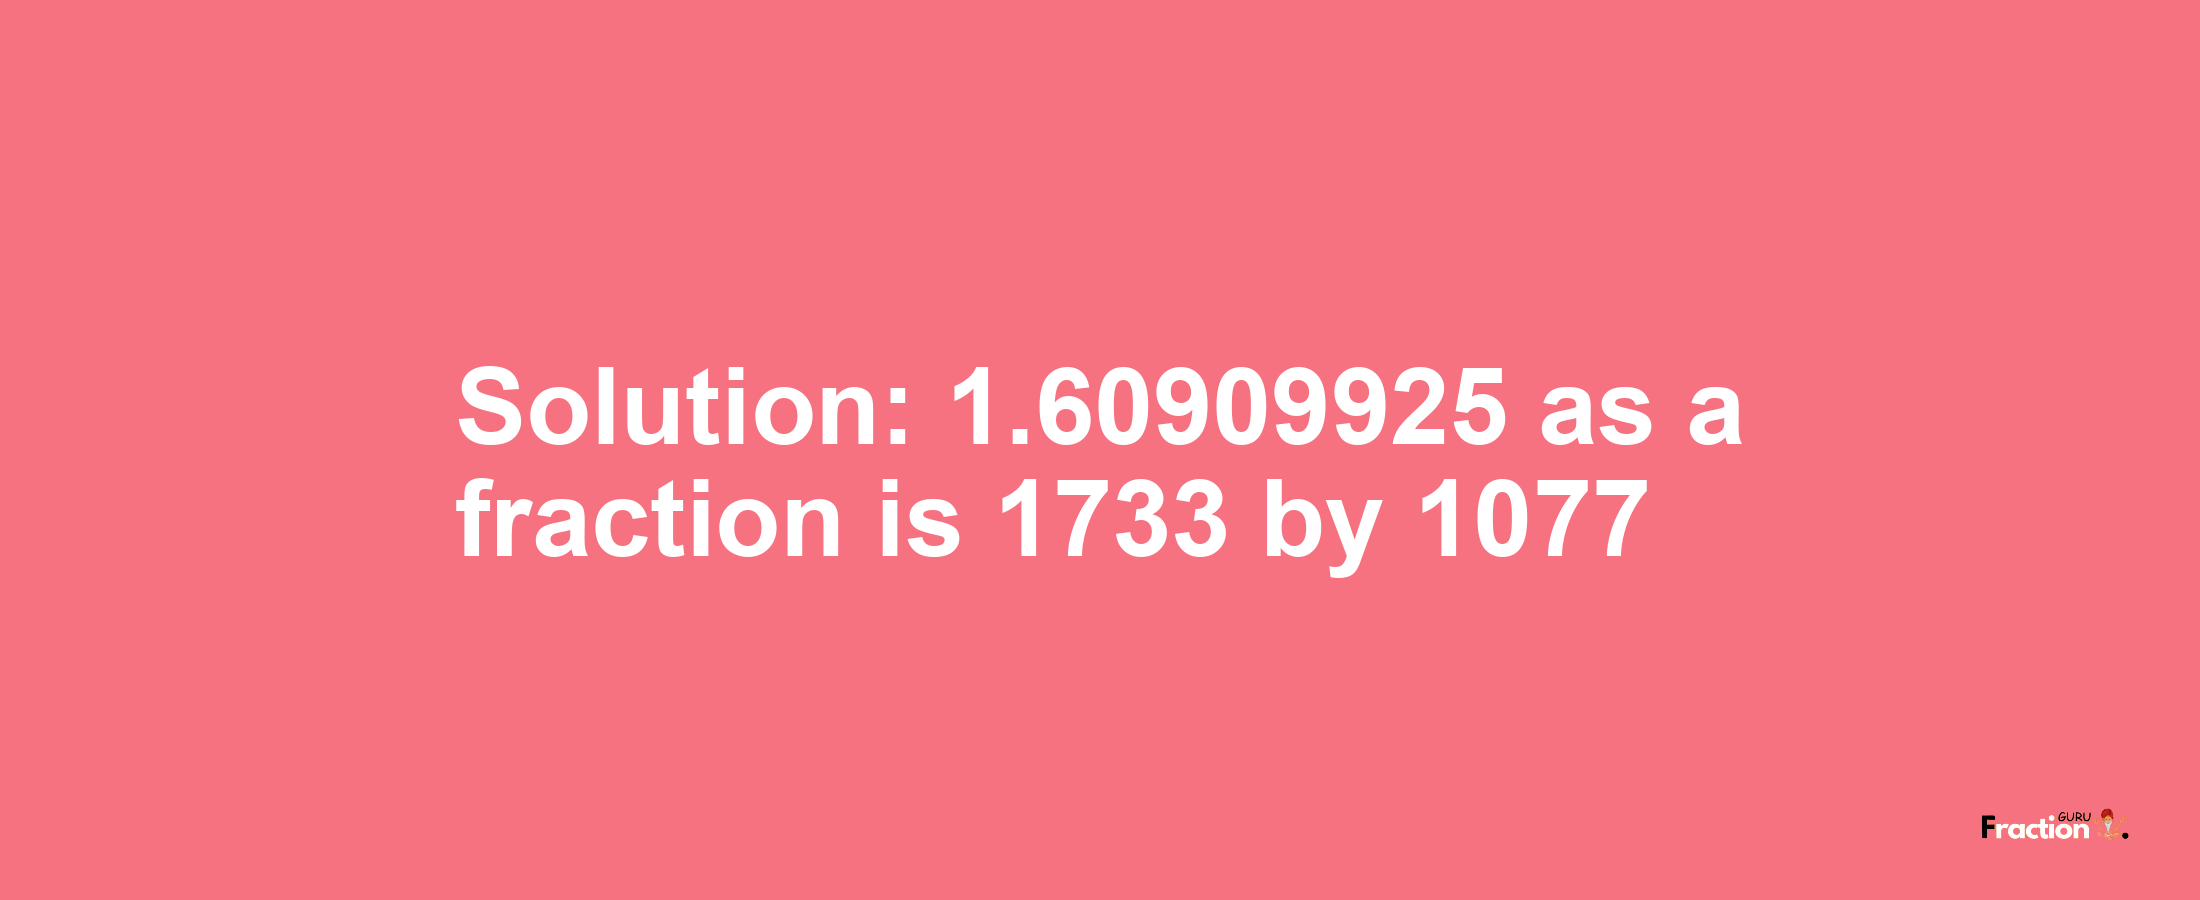 Solution:1.60909925 as a fraction is 1733/1077